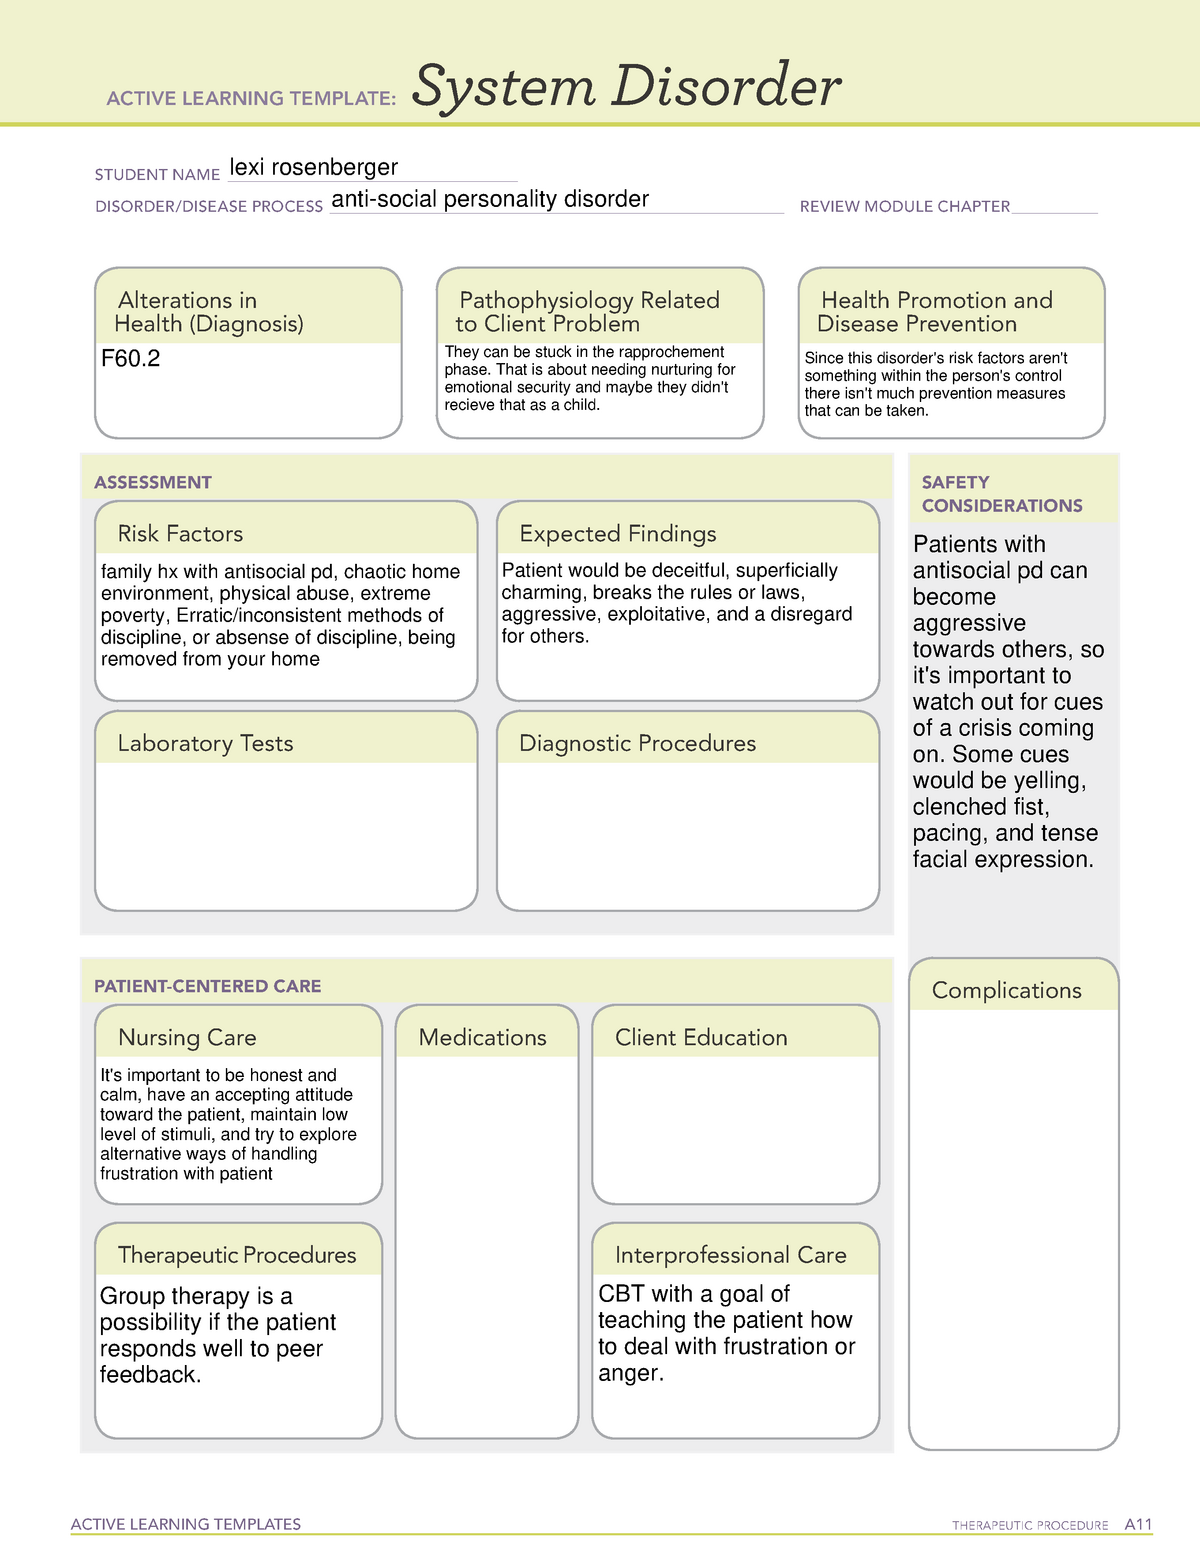 Antisocial Personality Disorder ACTIVE LEARNING TEMPLATES THERAPEUTIC